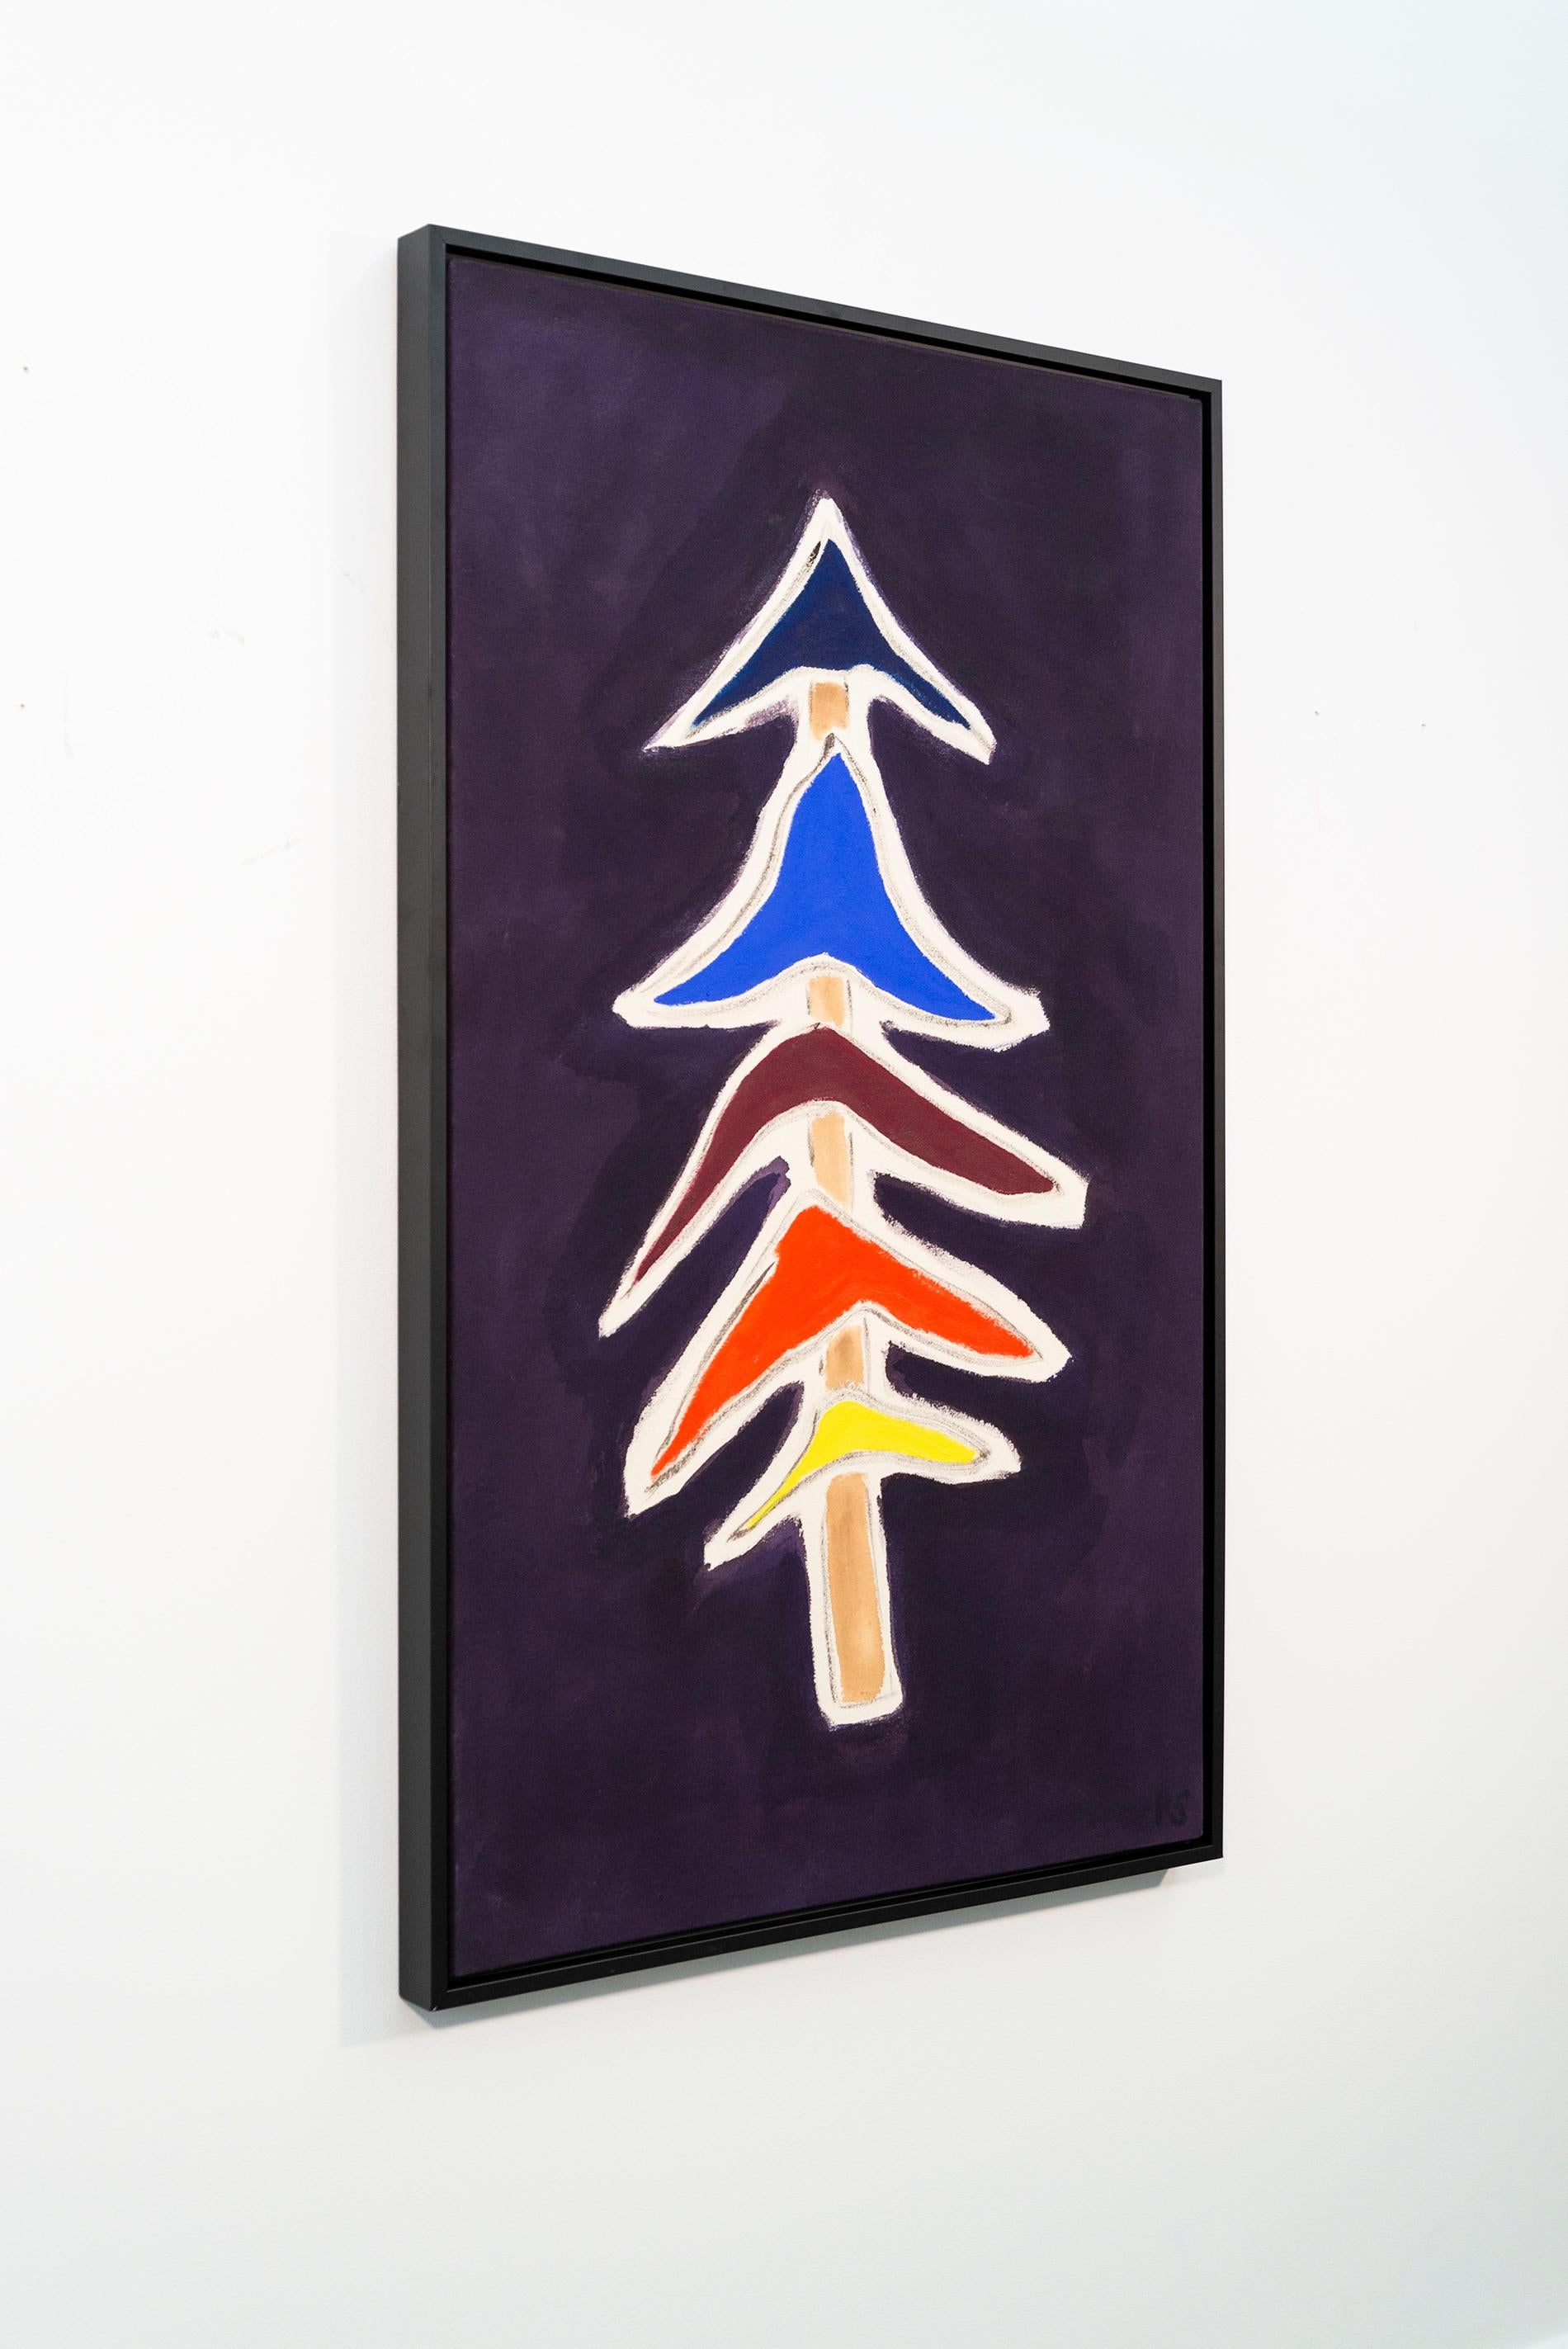 Top Hat - colorful, minimalist, abstracted tree, acrylic on canvas - Abstract Painting by Pat Service